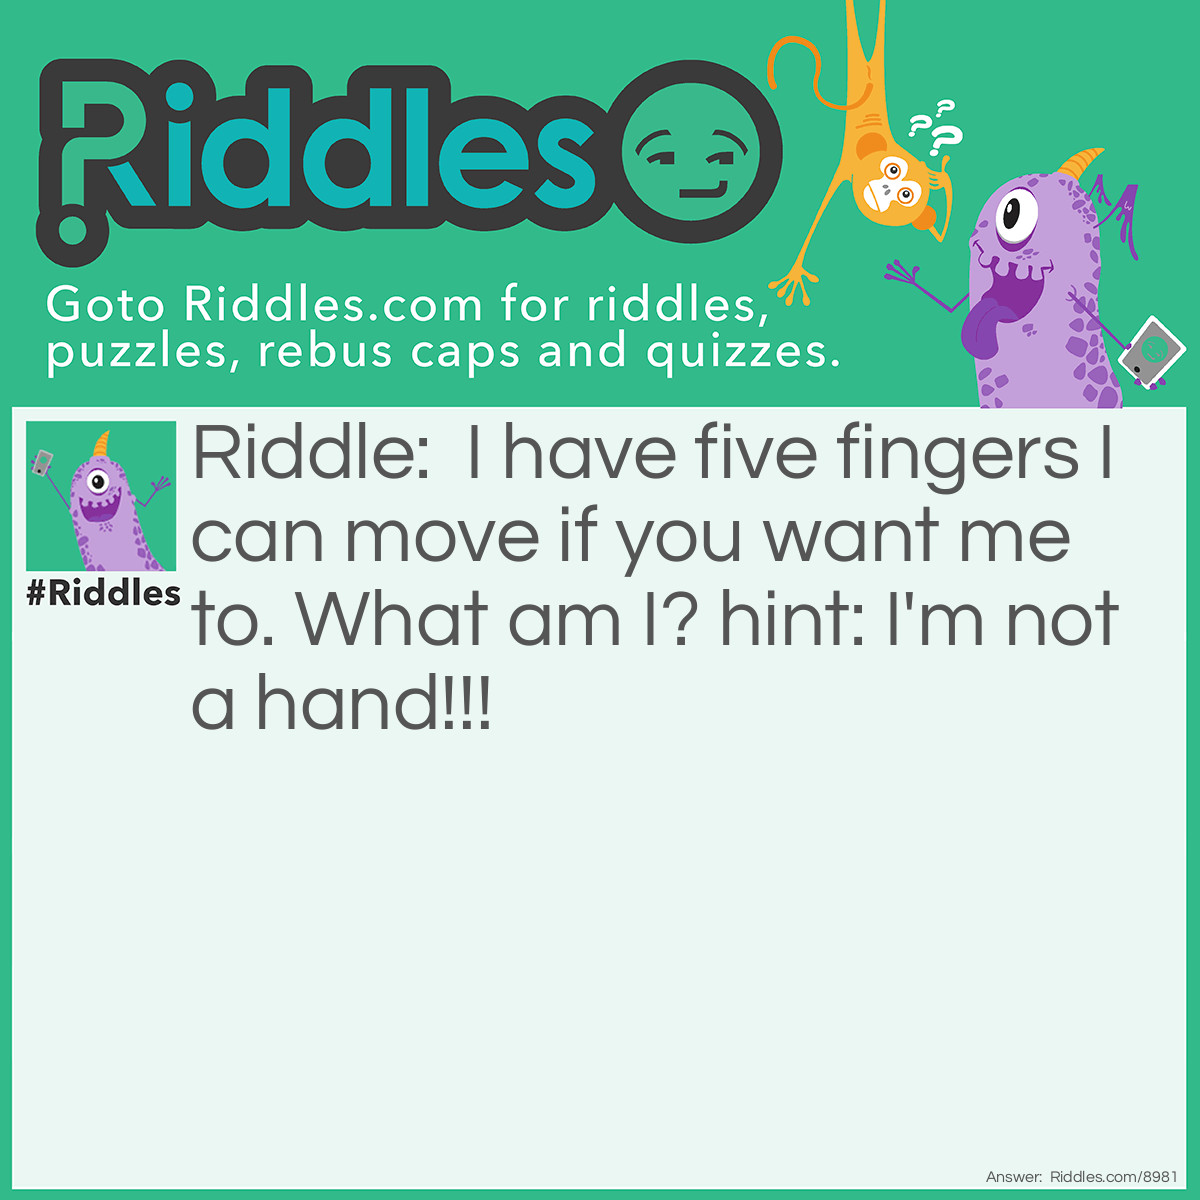 Riddle: I have five fingers I can move if you want me to. What am I? hint: I'm not a hand!!! Answer: I am a glove.